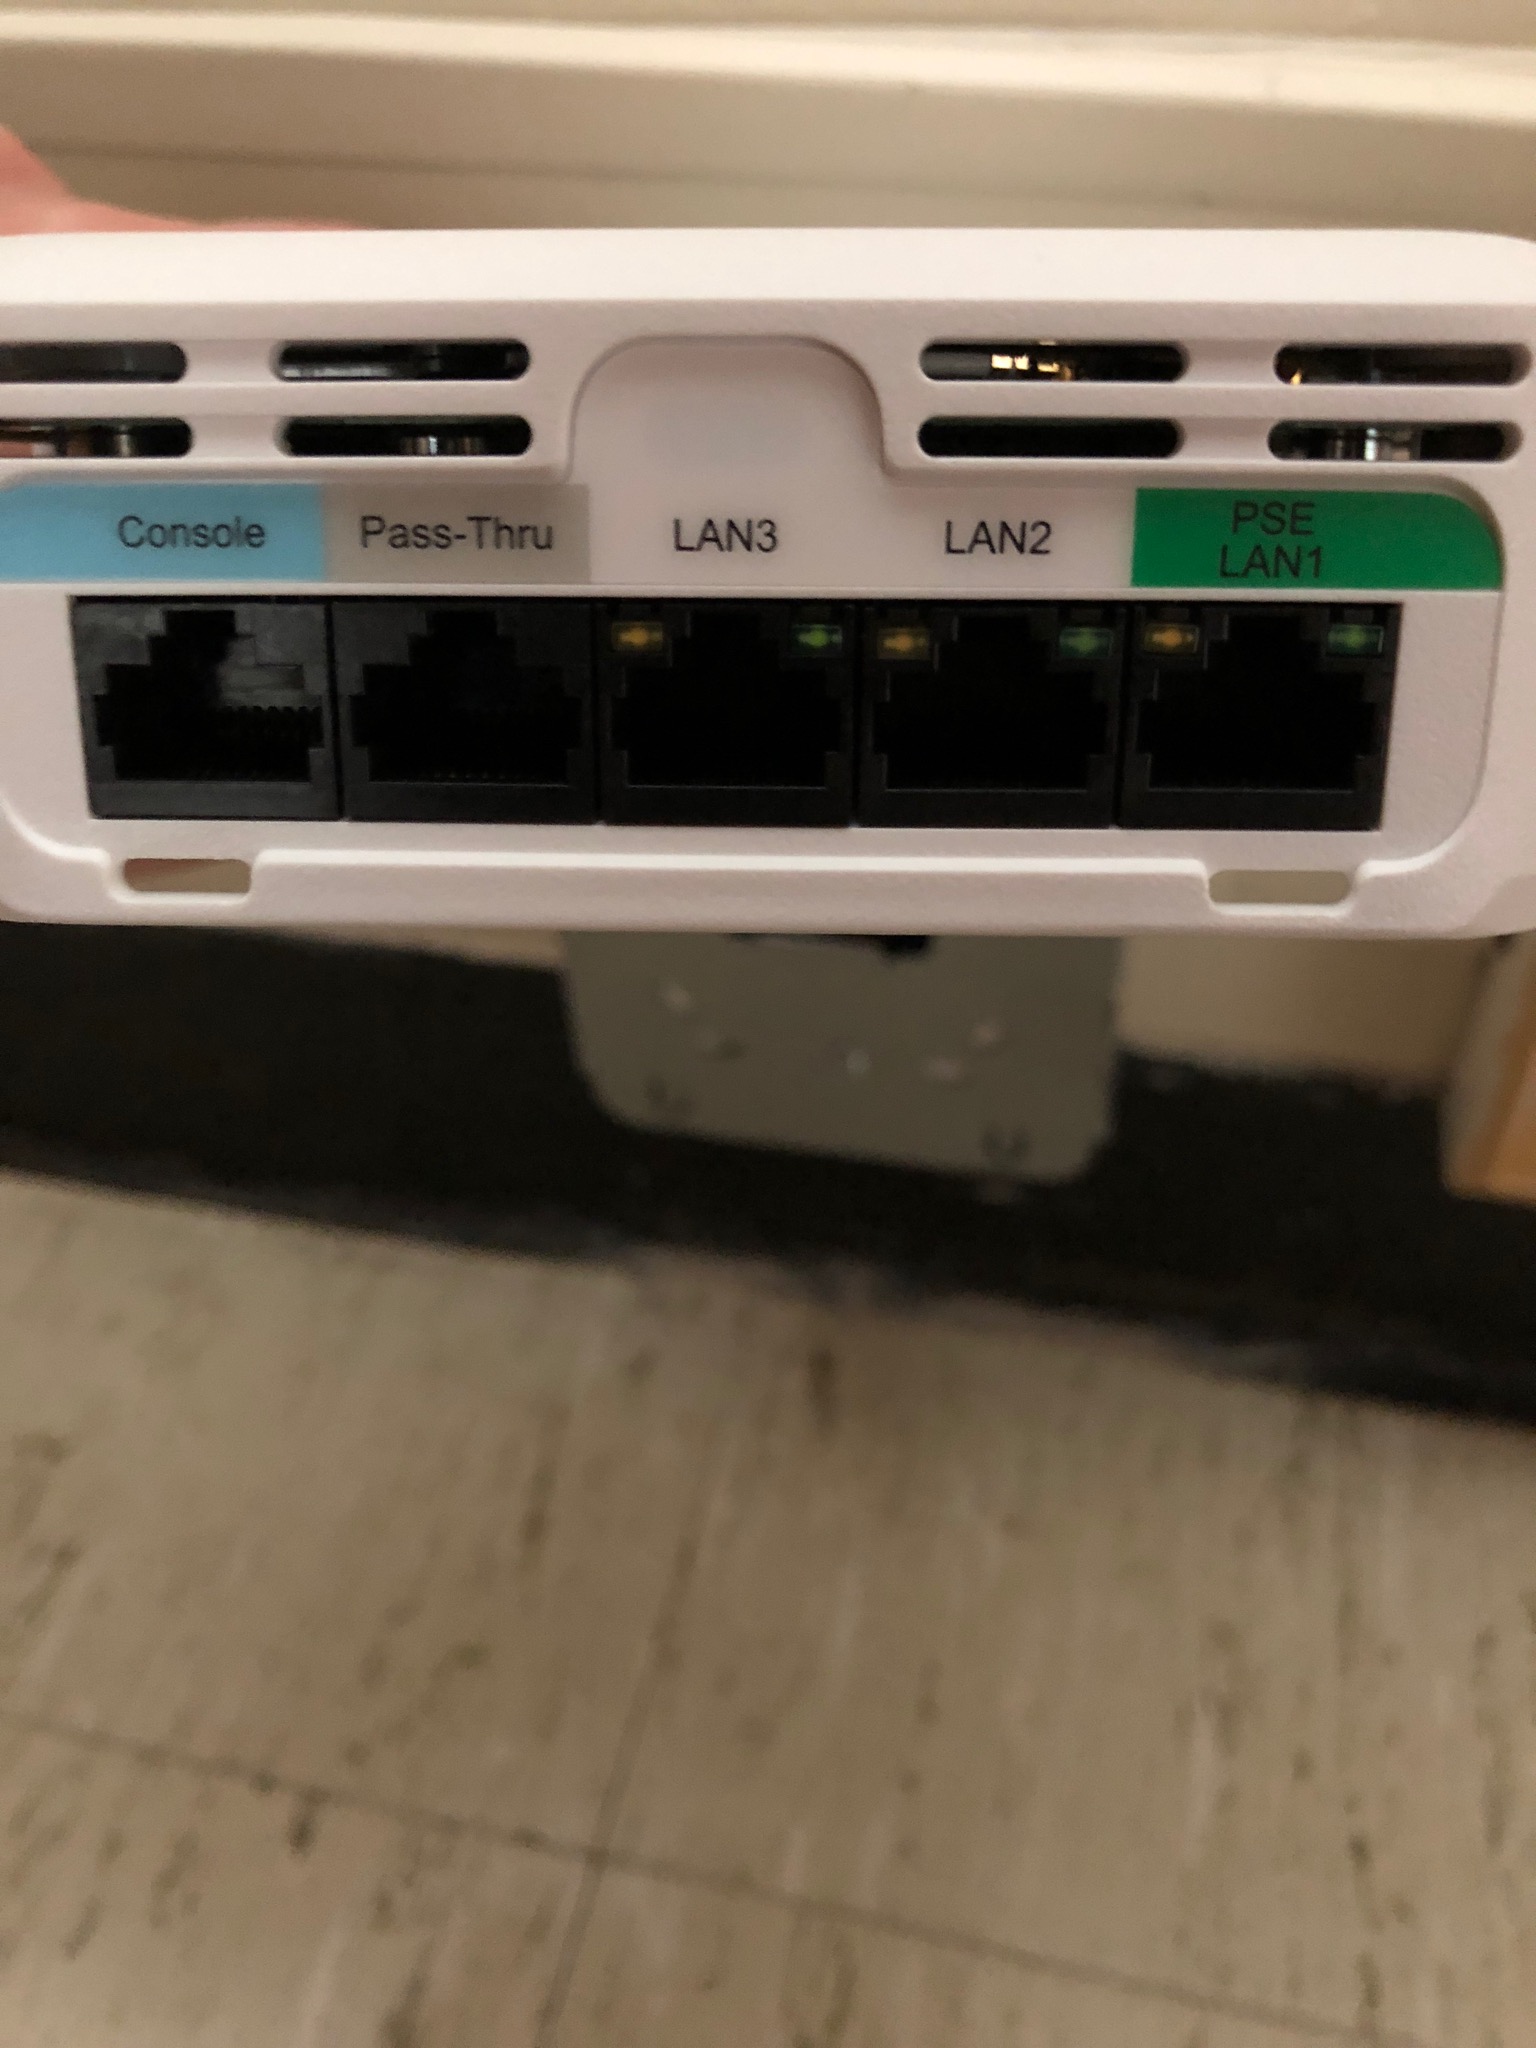 Ethernet port locations